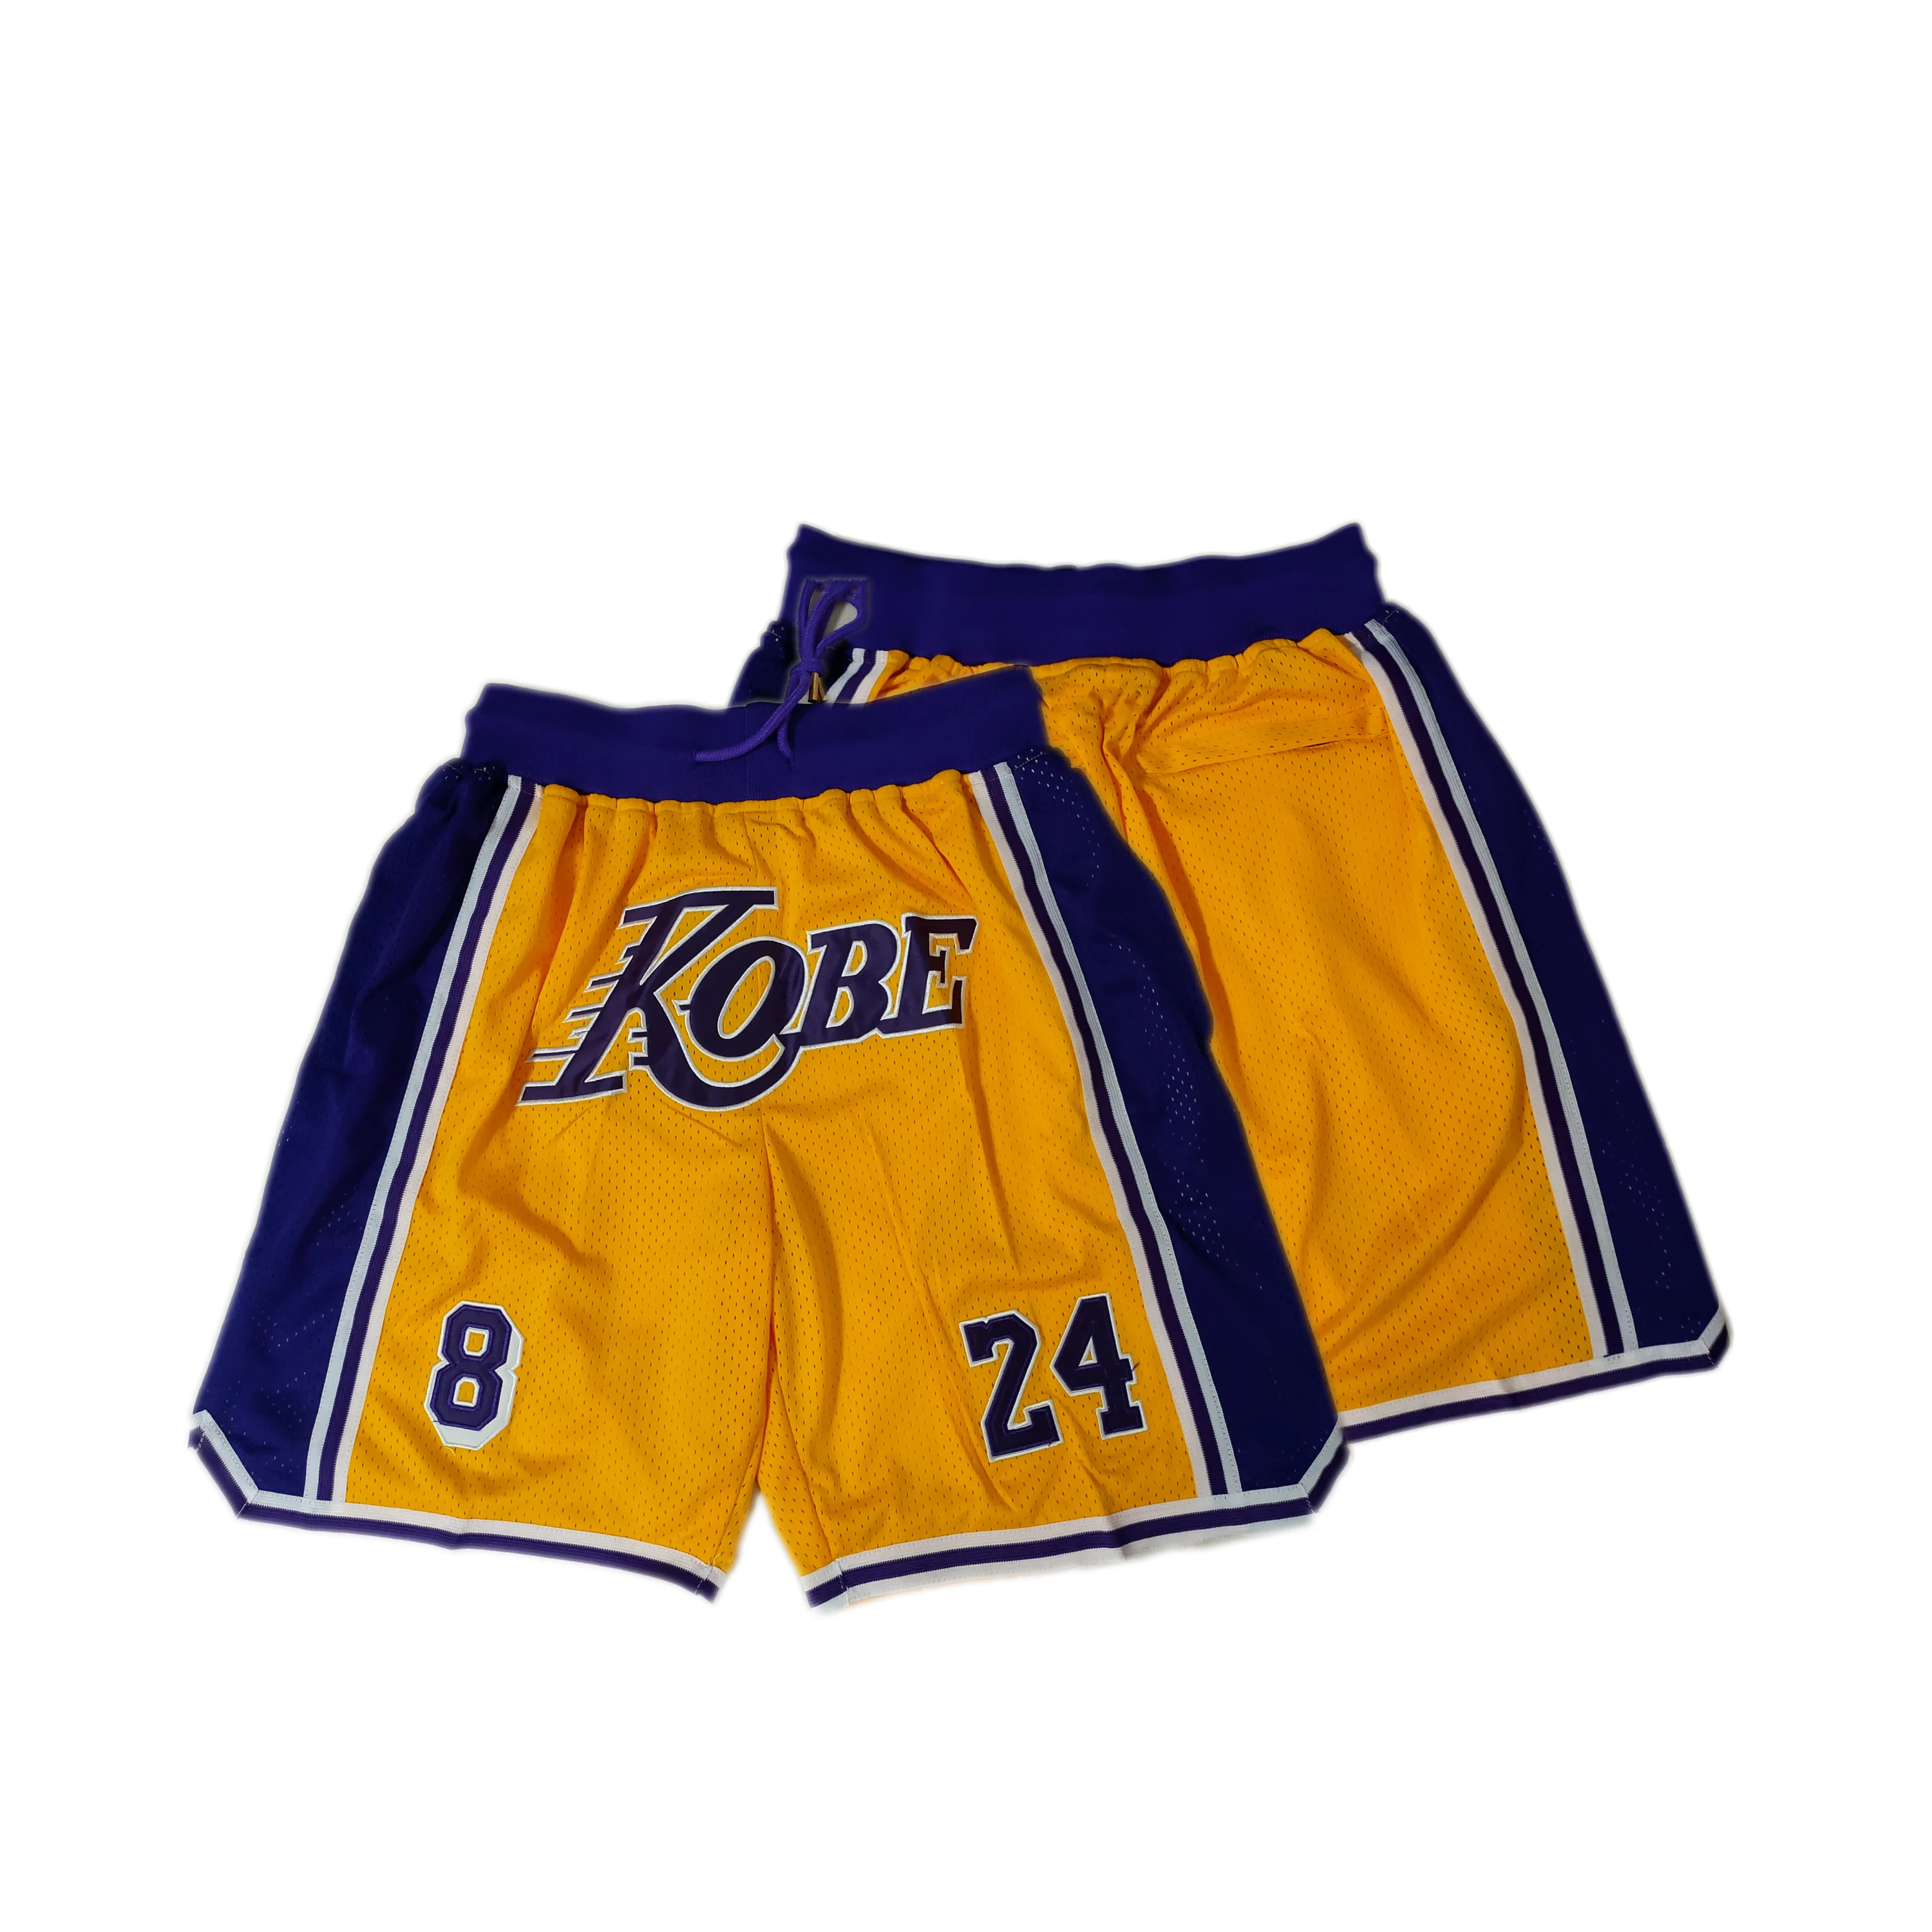 Mens 8 24 Legend Retro Yellow Basketball Shorts Embroidered with